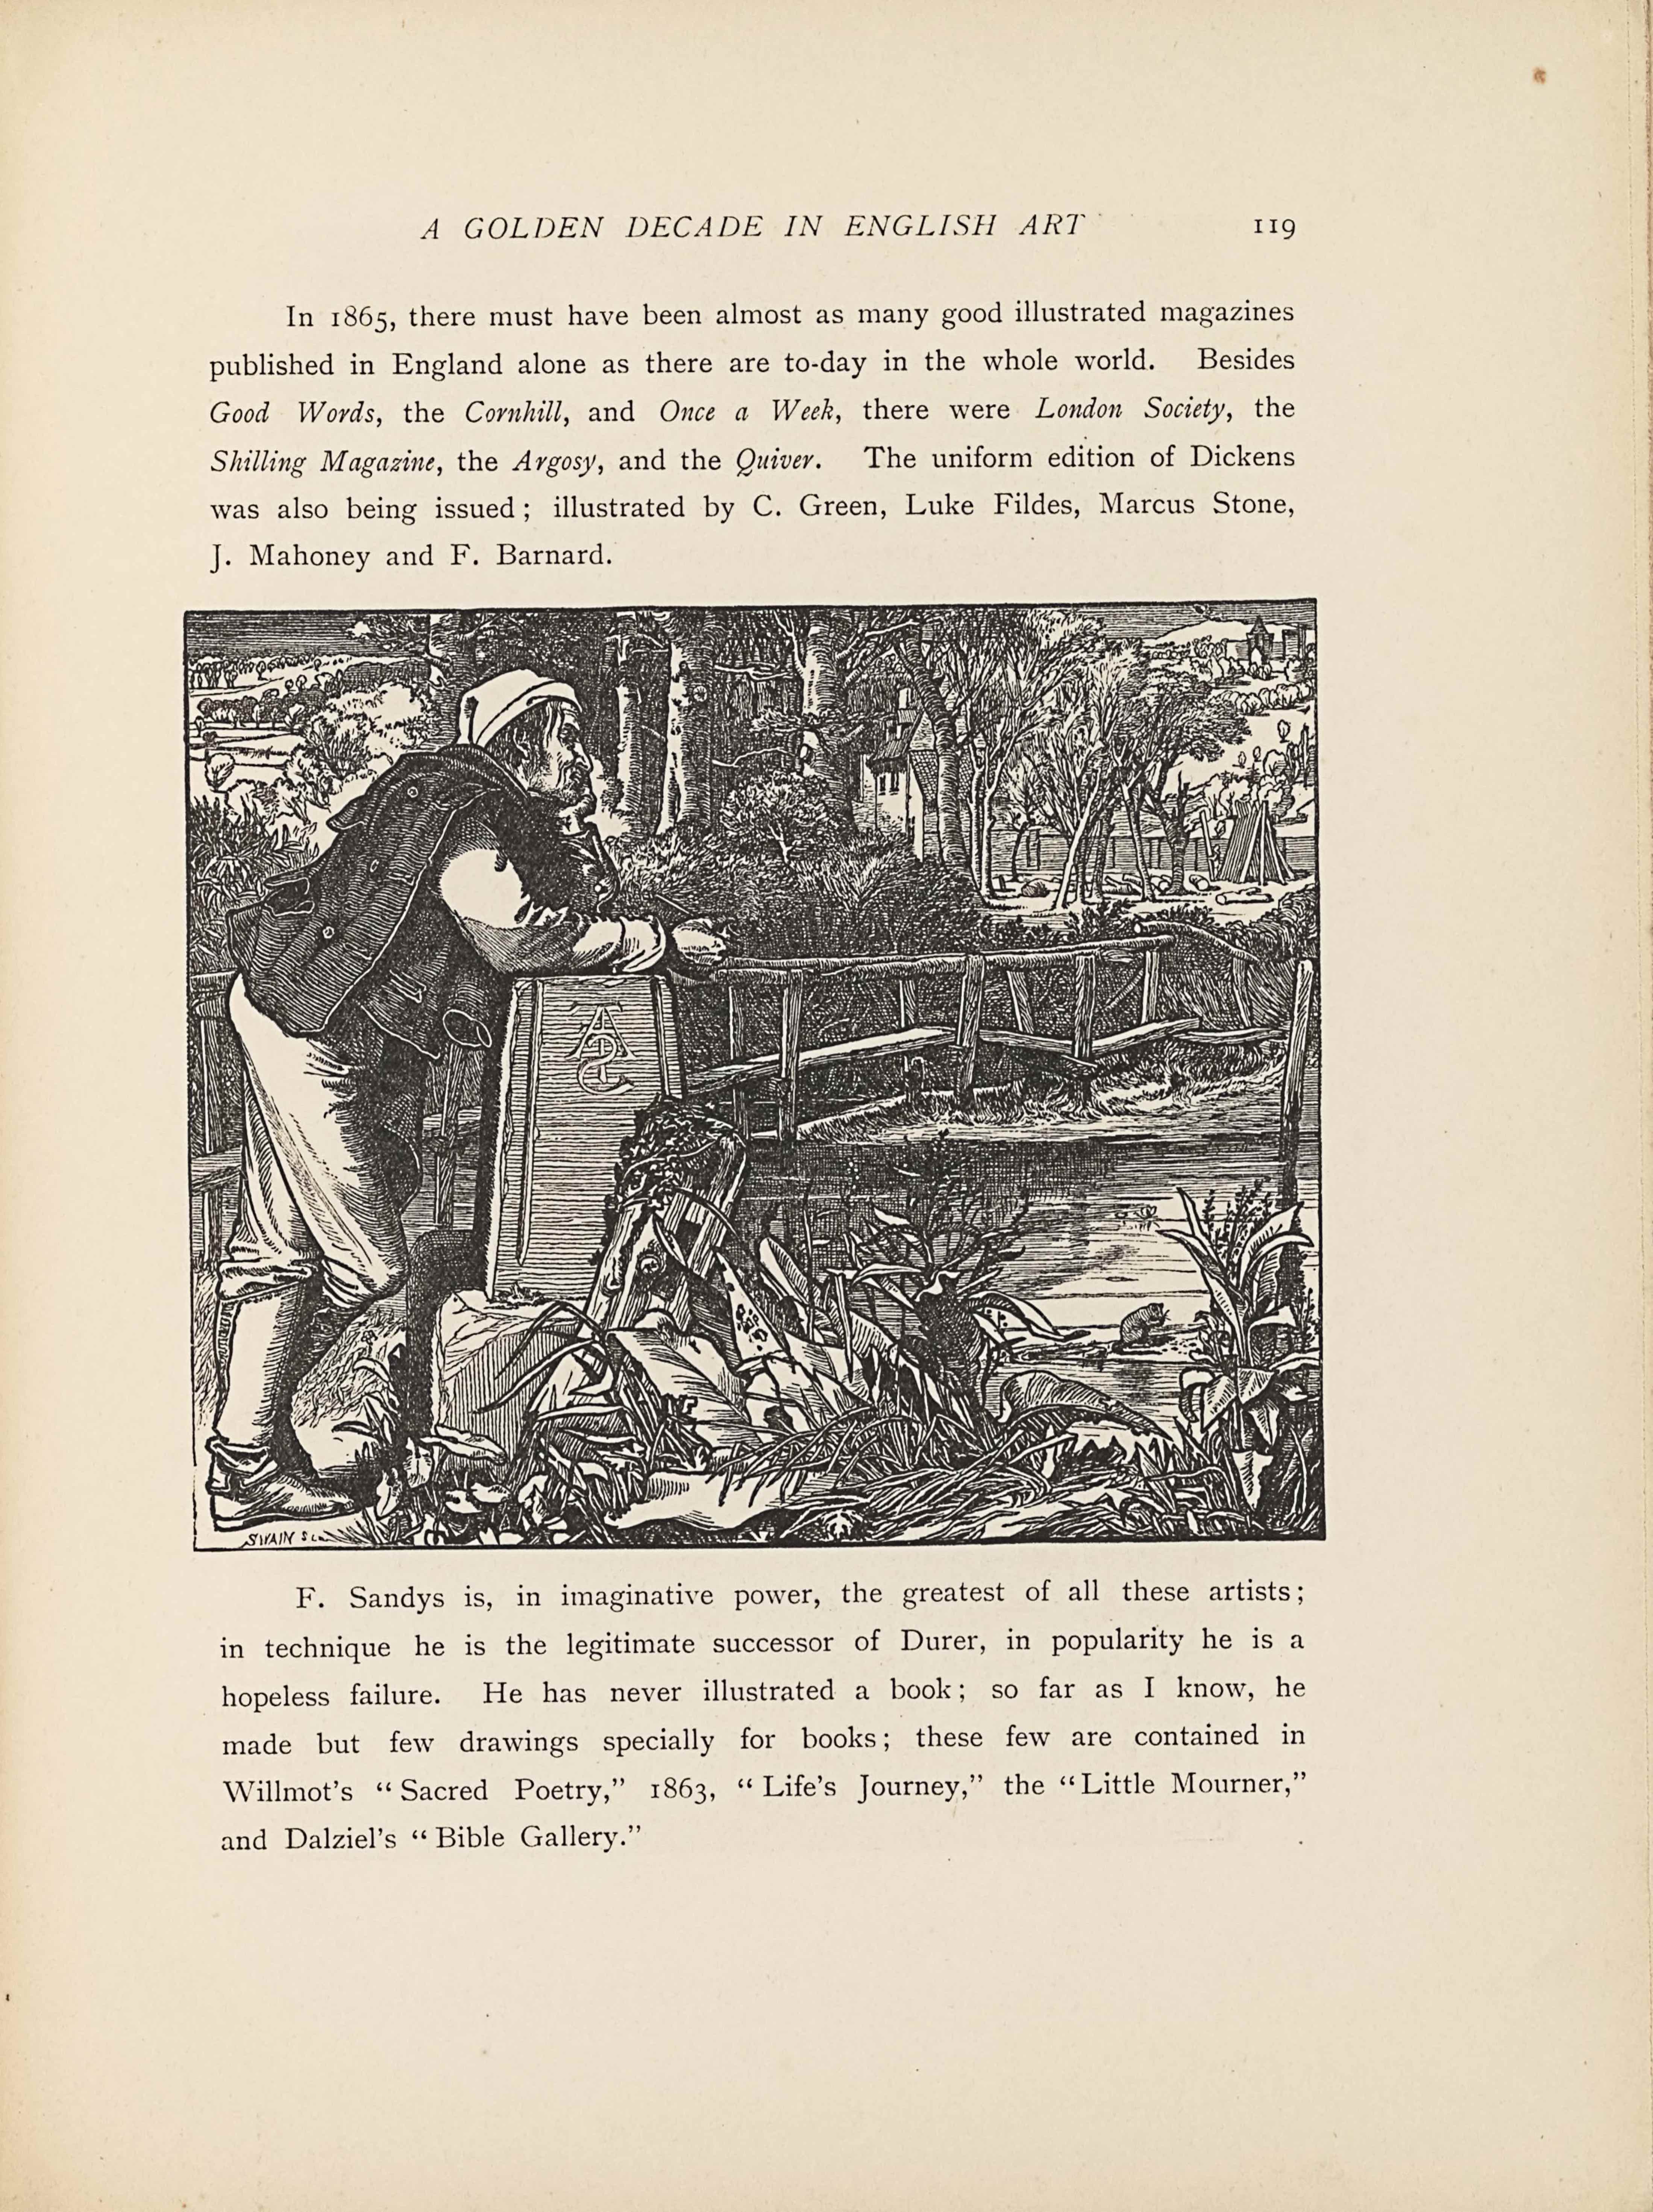 This line-block reproduction of a wood-engraved image appears in landscape orientation. There is one man gazing off into the distance with a detailed landscape illustrated around him. The man stands in the foreground to the left of the page, facing towards the right side and leaned forward onto a tall engraved stone beside a bridge. He takes up about the whole left side of the page in height, and one-quarter of the page width. The man has his right leg wrapped around in front of his left, clothed in knee-high boots and loose pants. He is wearing a long sleeve shirt and has his coat hung over his right shoulder. He has on a long cap and stringy pieces of hair fall forward onto his face, which is visible in profile. His right arm has the forearm resting on the stone, while only his left elbow leans on the stone and left hand cups his left cheek. The stone pillar he leans on rises to about his waist, or three-quarters up from the bottom of the page, and it tapers off slightly towards the top. The pillar has two vertical lines engraved on the outer edges and the letters “F” “A,” and “S”—the artist Frederick Augustus Sandys’ monogram--are engraved backwards on the centre of the block (likely due to a failure to reverse the letters for the wood engraver). A log with plants growing out of it is leaning on the front of the stone pillar. The foreground is otherwise filled with large leaves and reeds. Behind the man on the left and travelling in a line diagonally up towards the right side of the page is a simple wooden bridge. The bridge has railings made of wood pieces running horizontally in two lines with a few vertical support pieces above the bridge base. Water fills the mid-ground underneath the bridge, reflective of the sky in distorted shading. Bushes line the shore on the far side of the bridge, rising up to the man’s shoulder in height on the page. Behind the bushes are trees forming a forest in the central background, and there is a house to the right peeking out between trees. In the top right corner of the page, or the right background, is a less treed area with logs on the ground and a tent set up. There is also a hill lined with some bushes and trees and a few simple buildings before the skyline in the farthest distance. In the top left corner, the left background, there are also trees and hills rising up to meet a thin skyline.